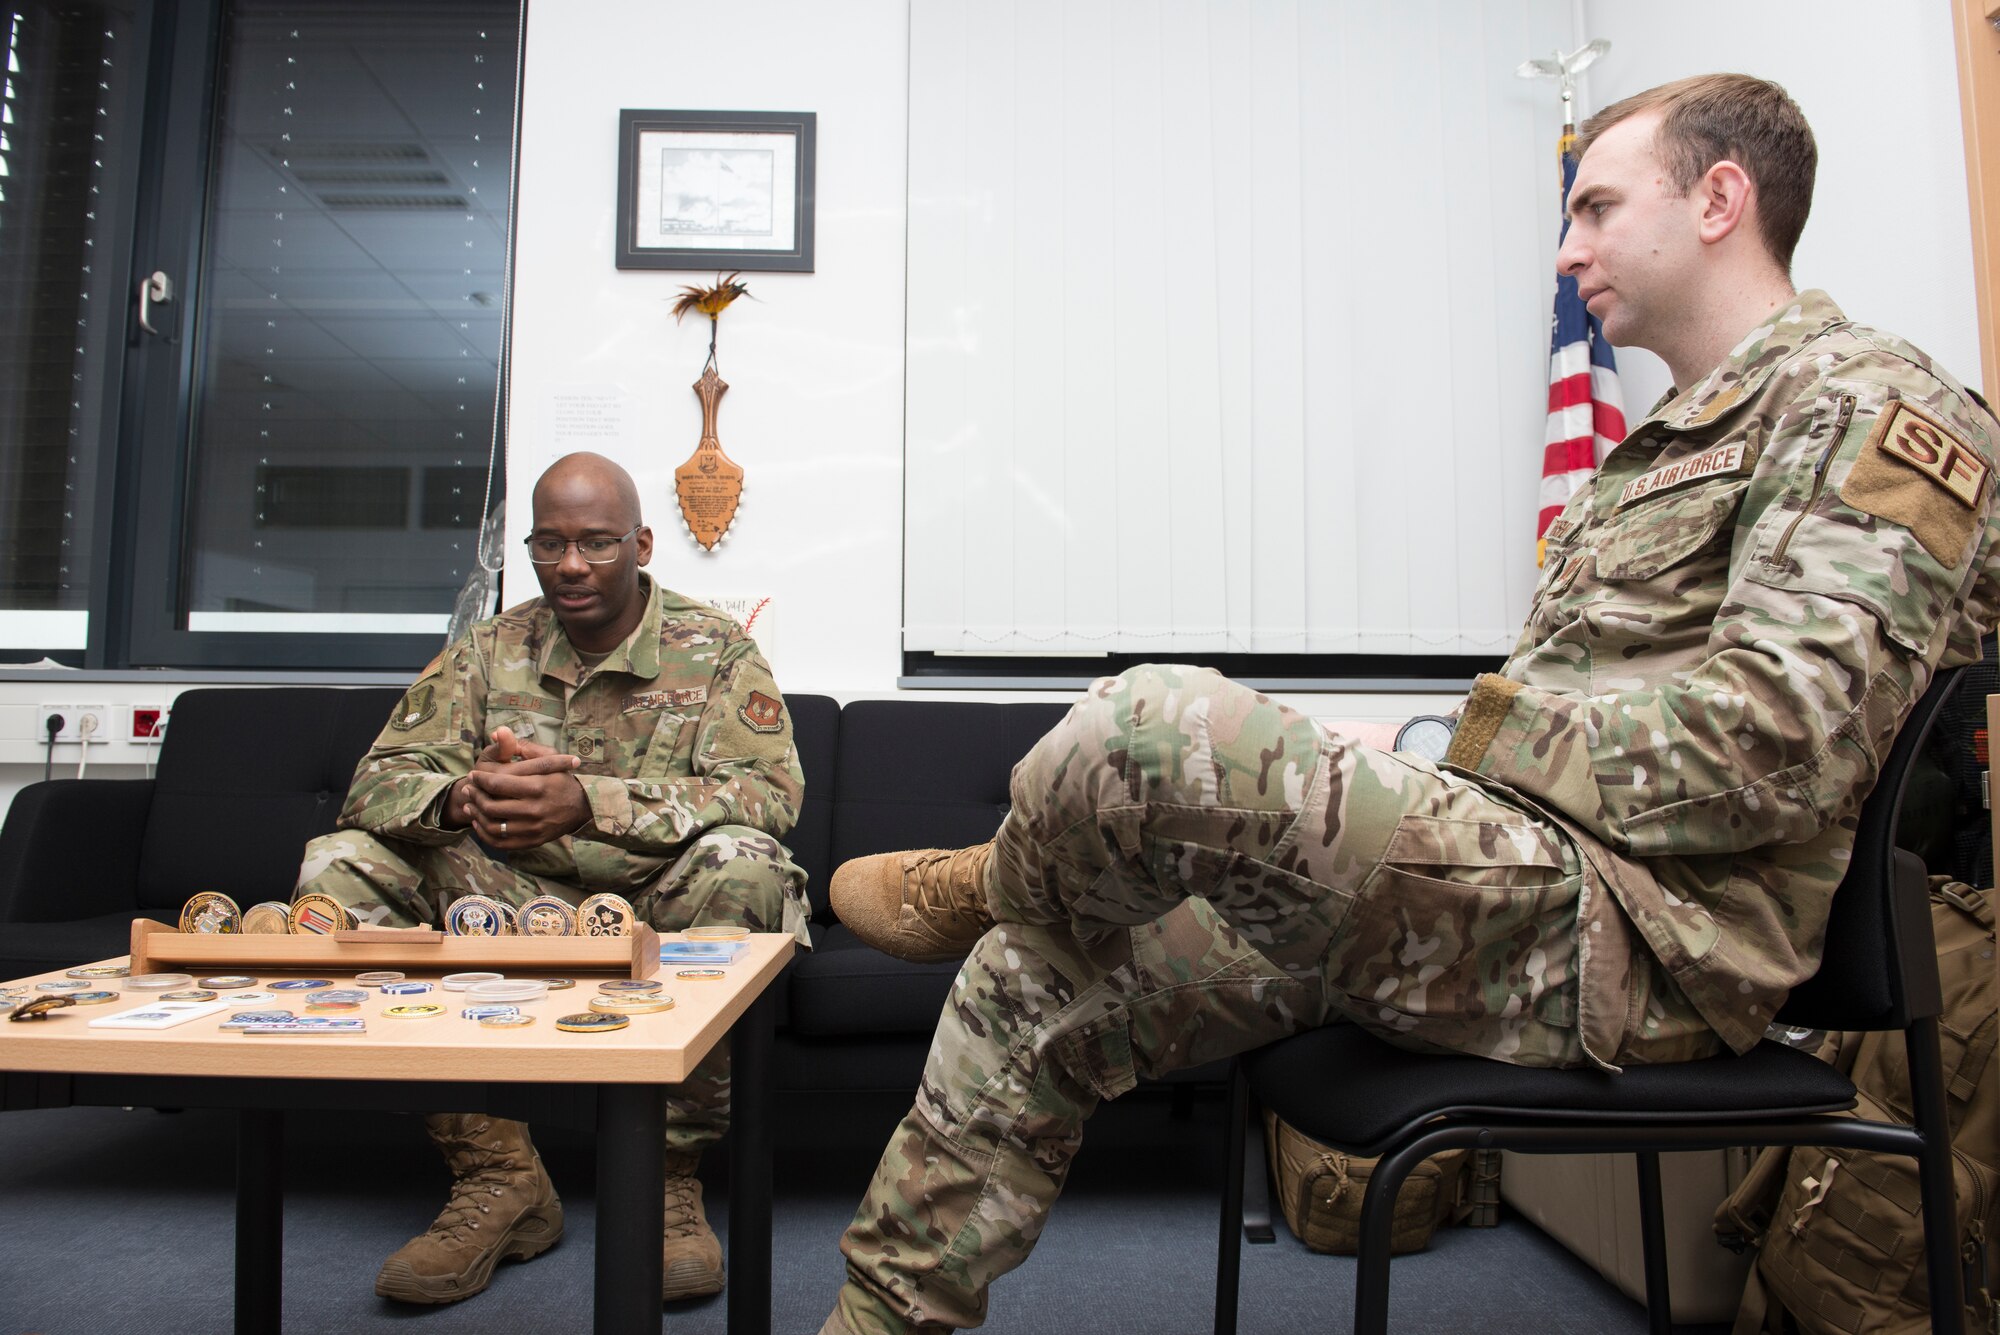 Photo of two Airmen conversing at a table